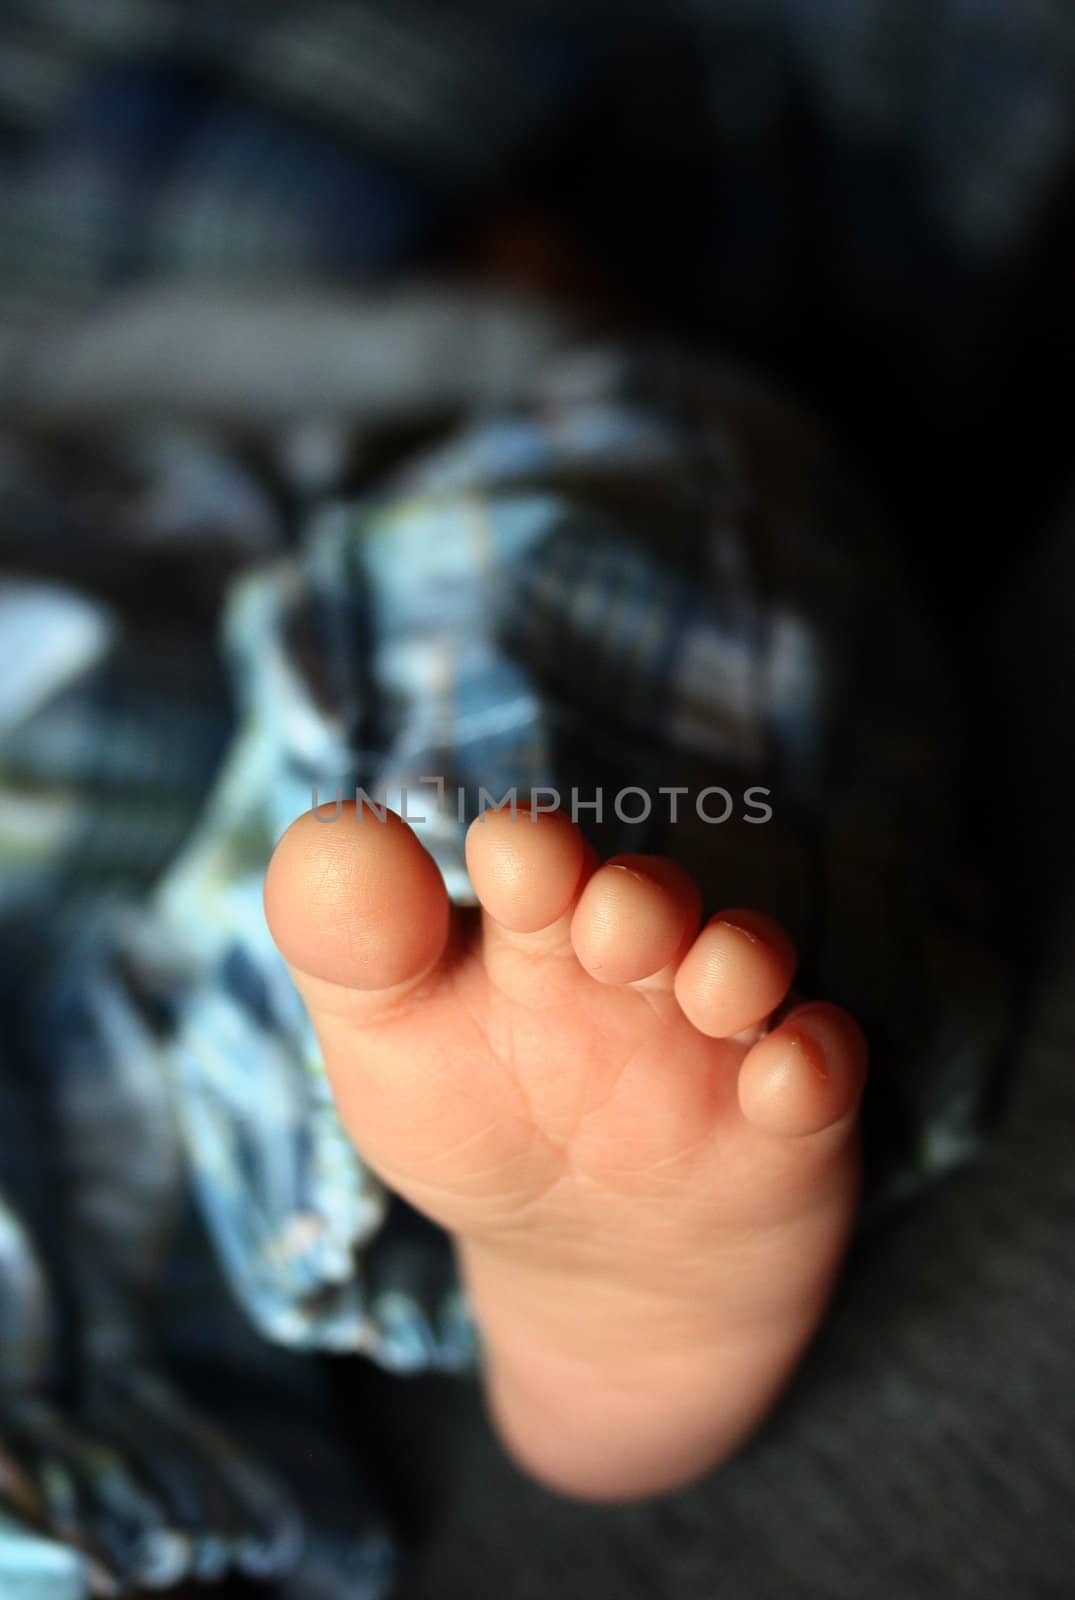 The foot of a newborn baby